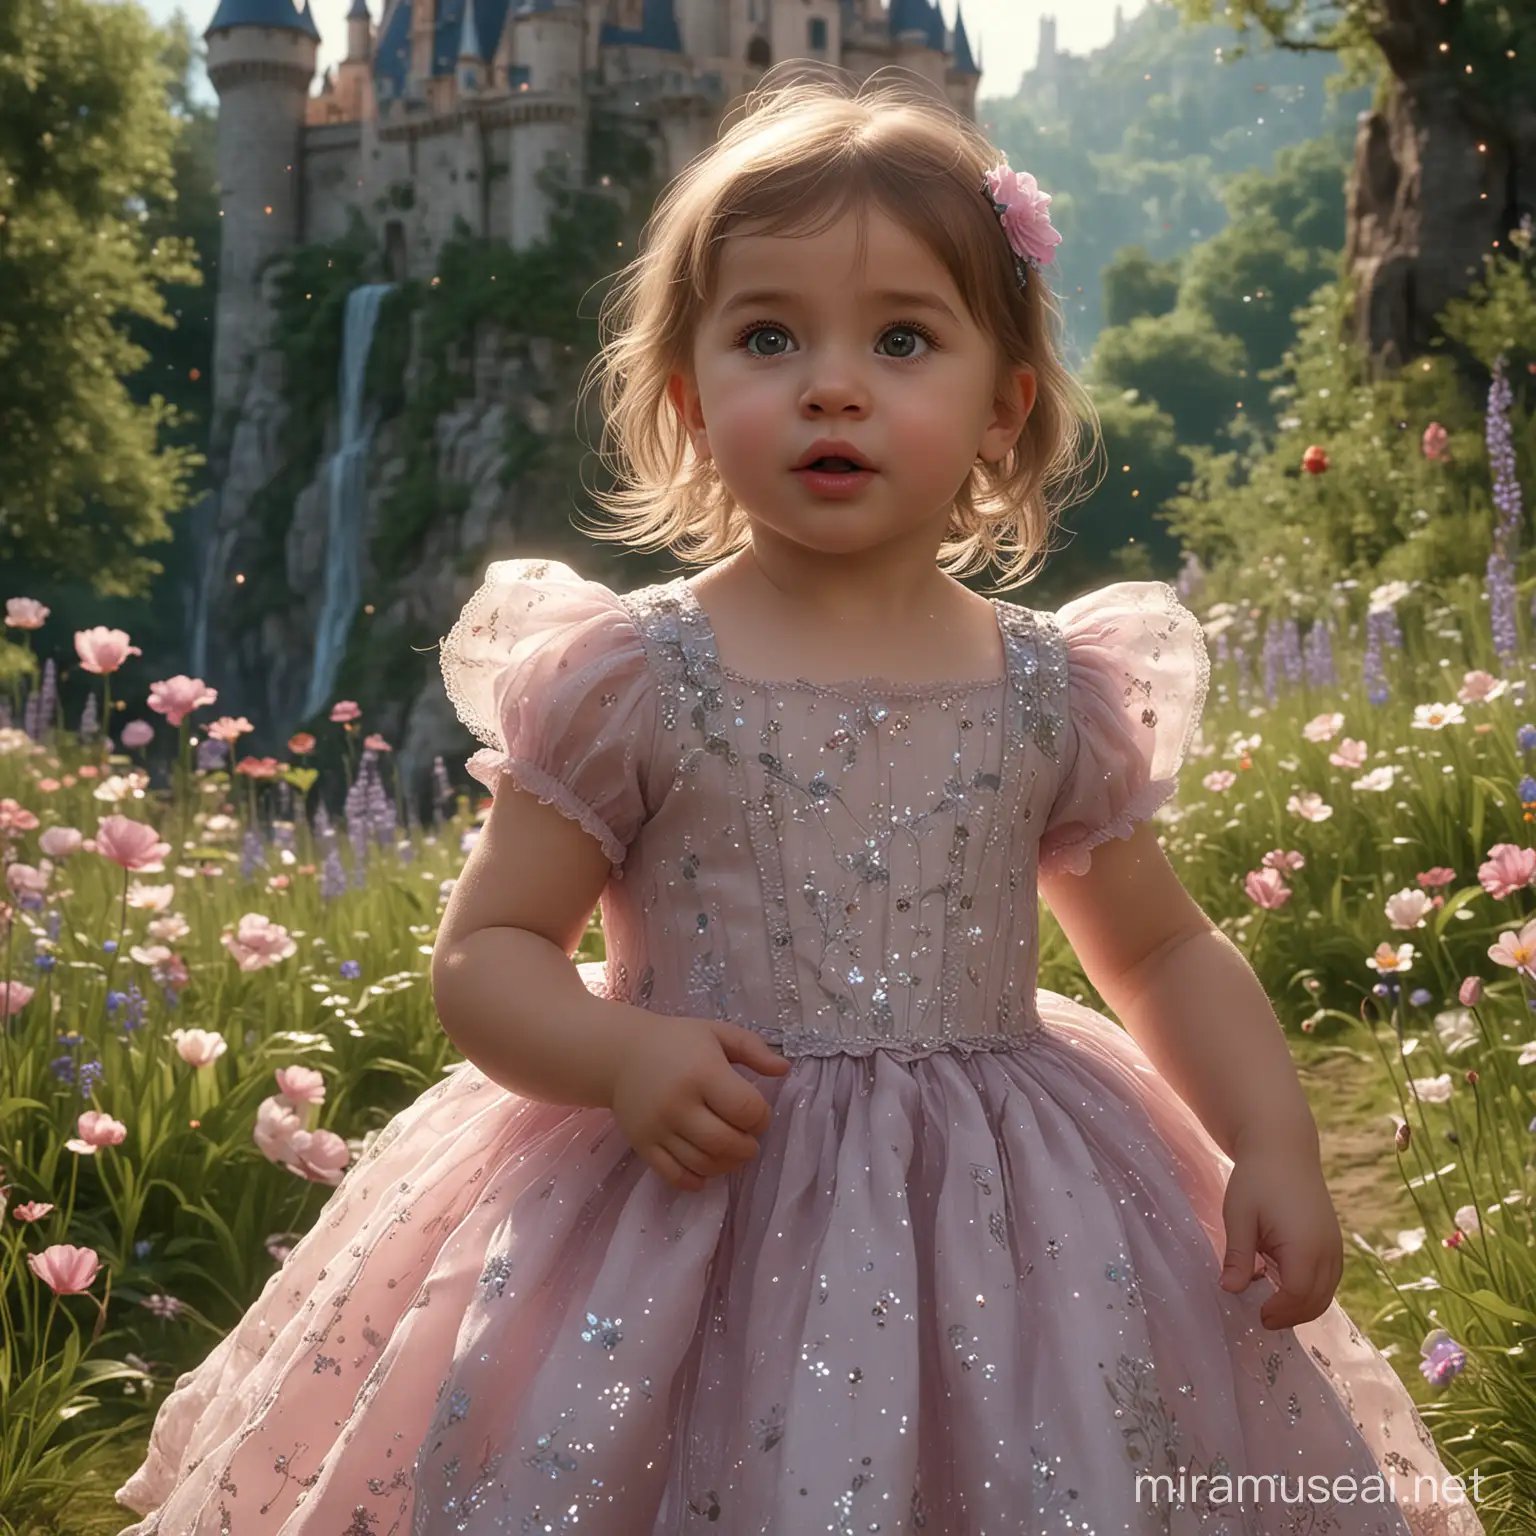 best quality,4k,8k,highres,masterpiece:1.2), ultra-detailed, (realistic,photorealistic,photo-realistic:1.37), cute 2-year-old girl, in a magical delicate dress, (in front of a fairytale forest with a castle and flowers), Alex Grace, adorable pouty lips, innocent gaze, digital art, sparkle